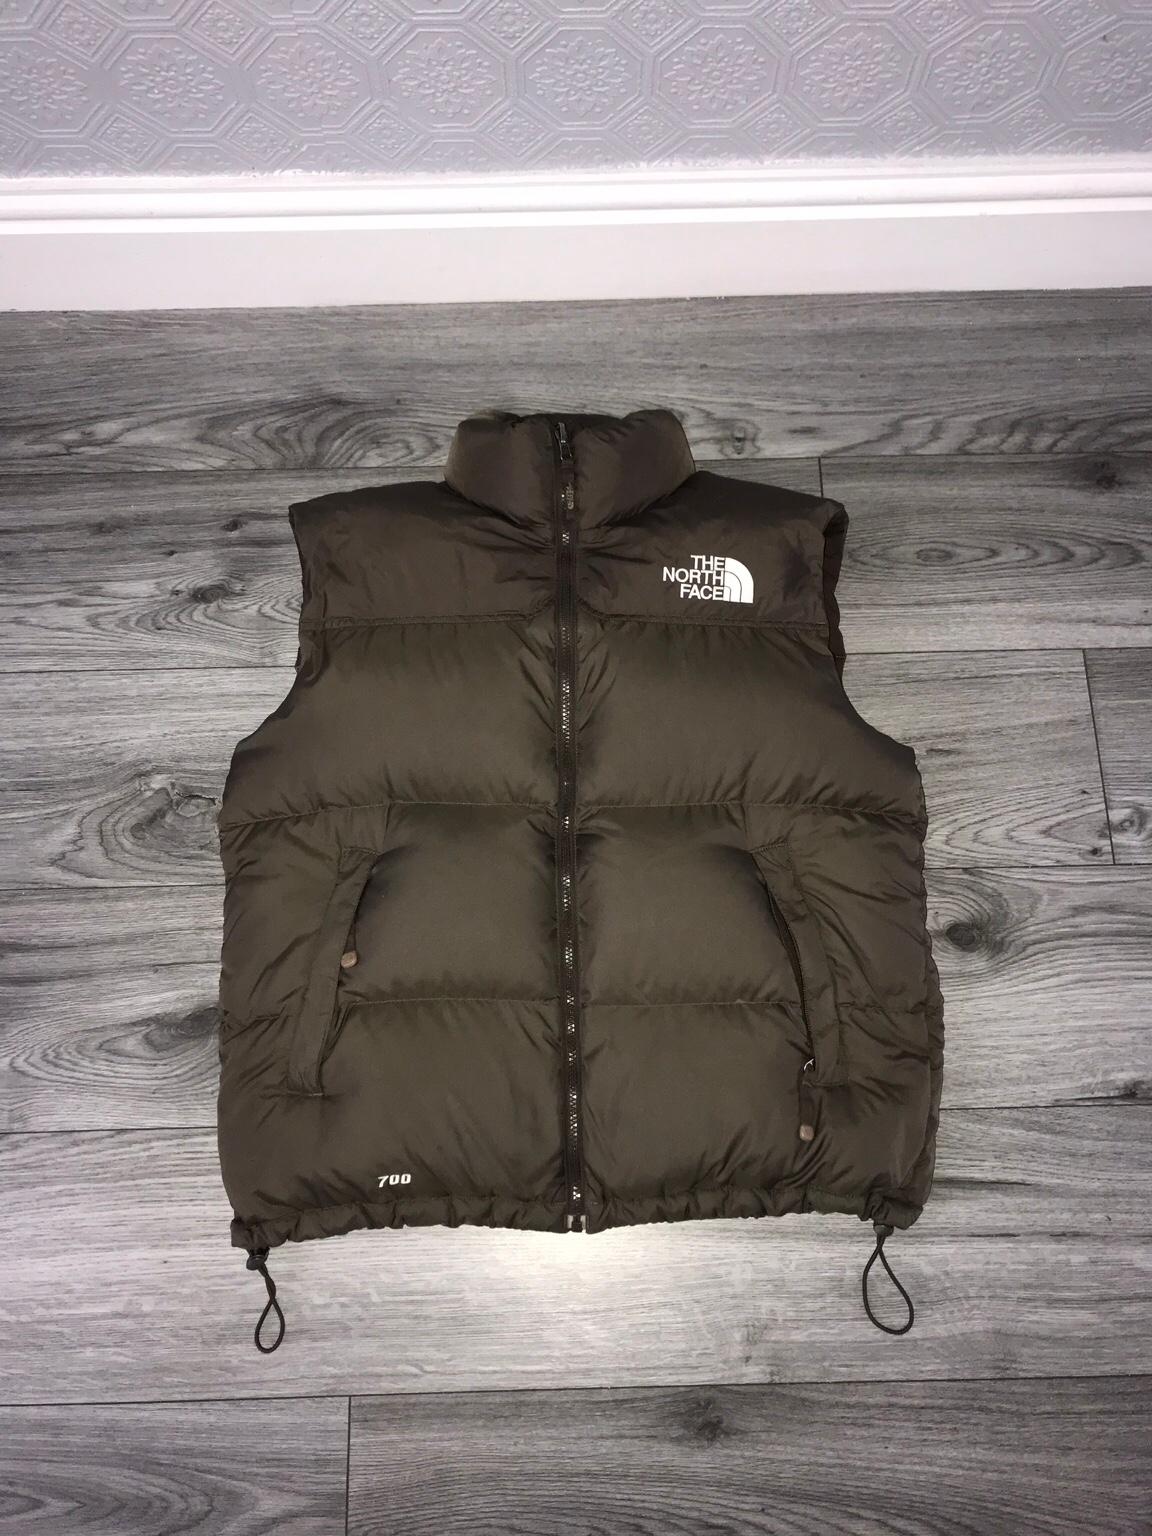 brown north face gilet